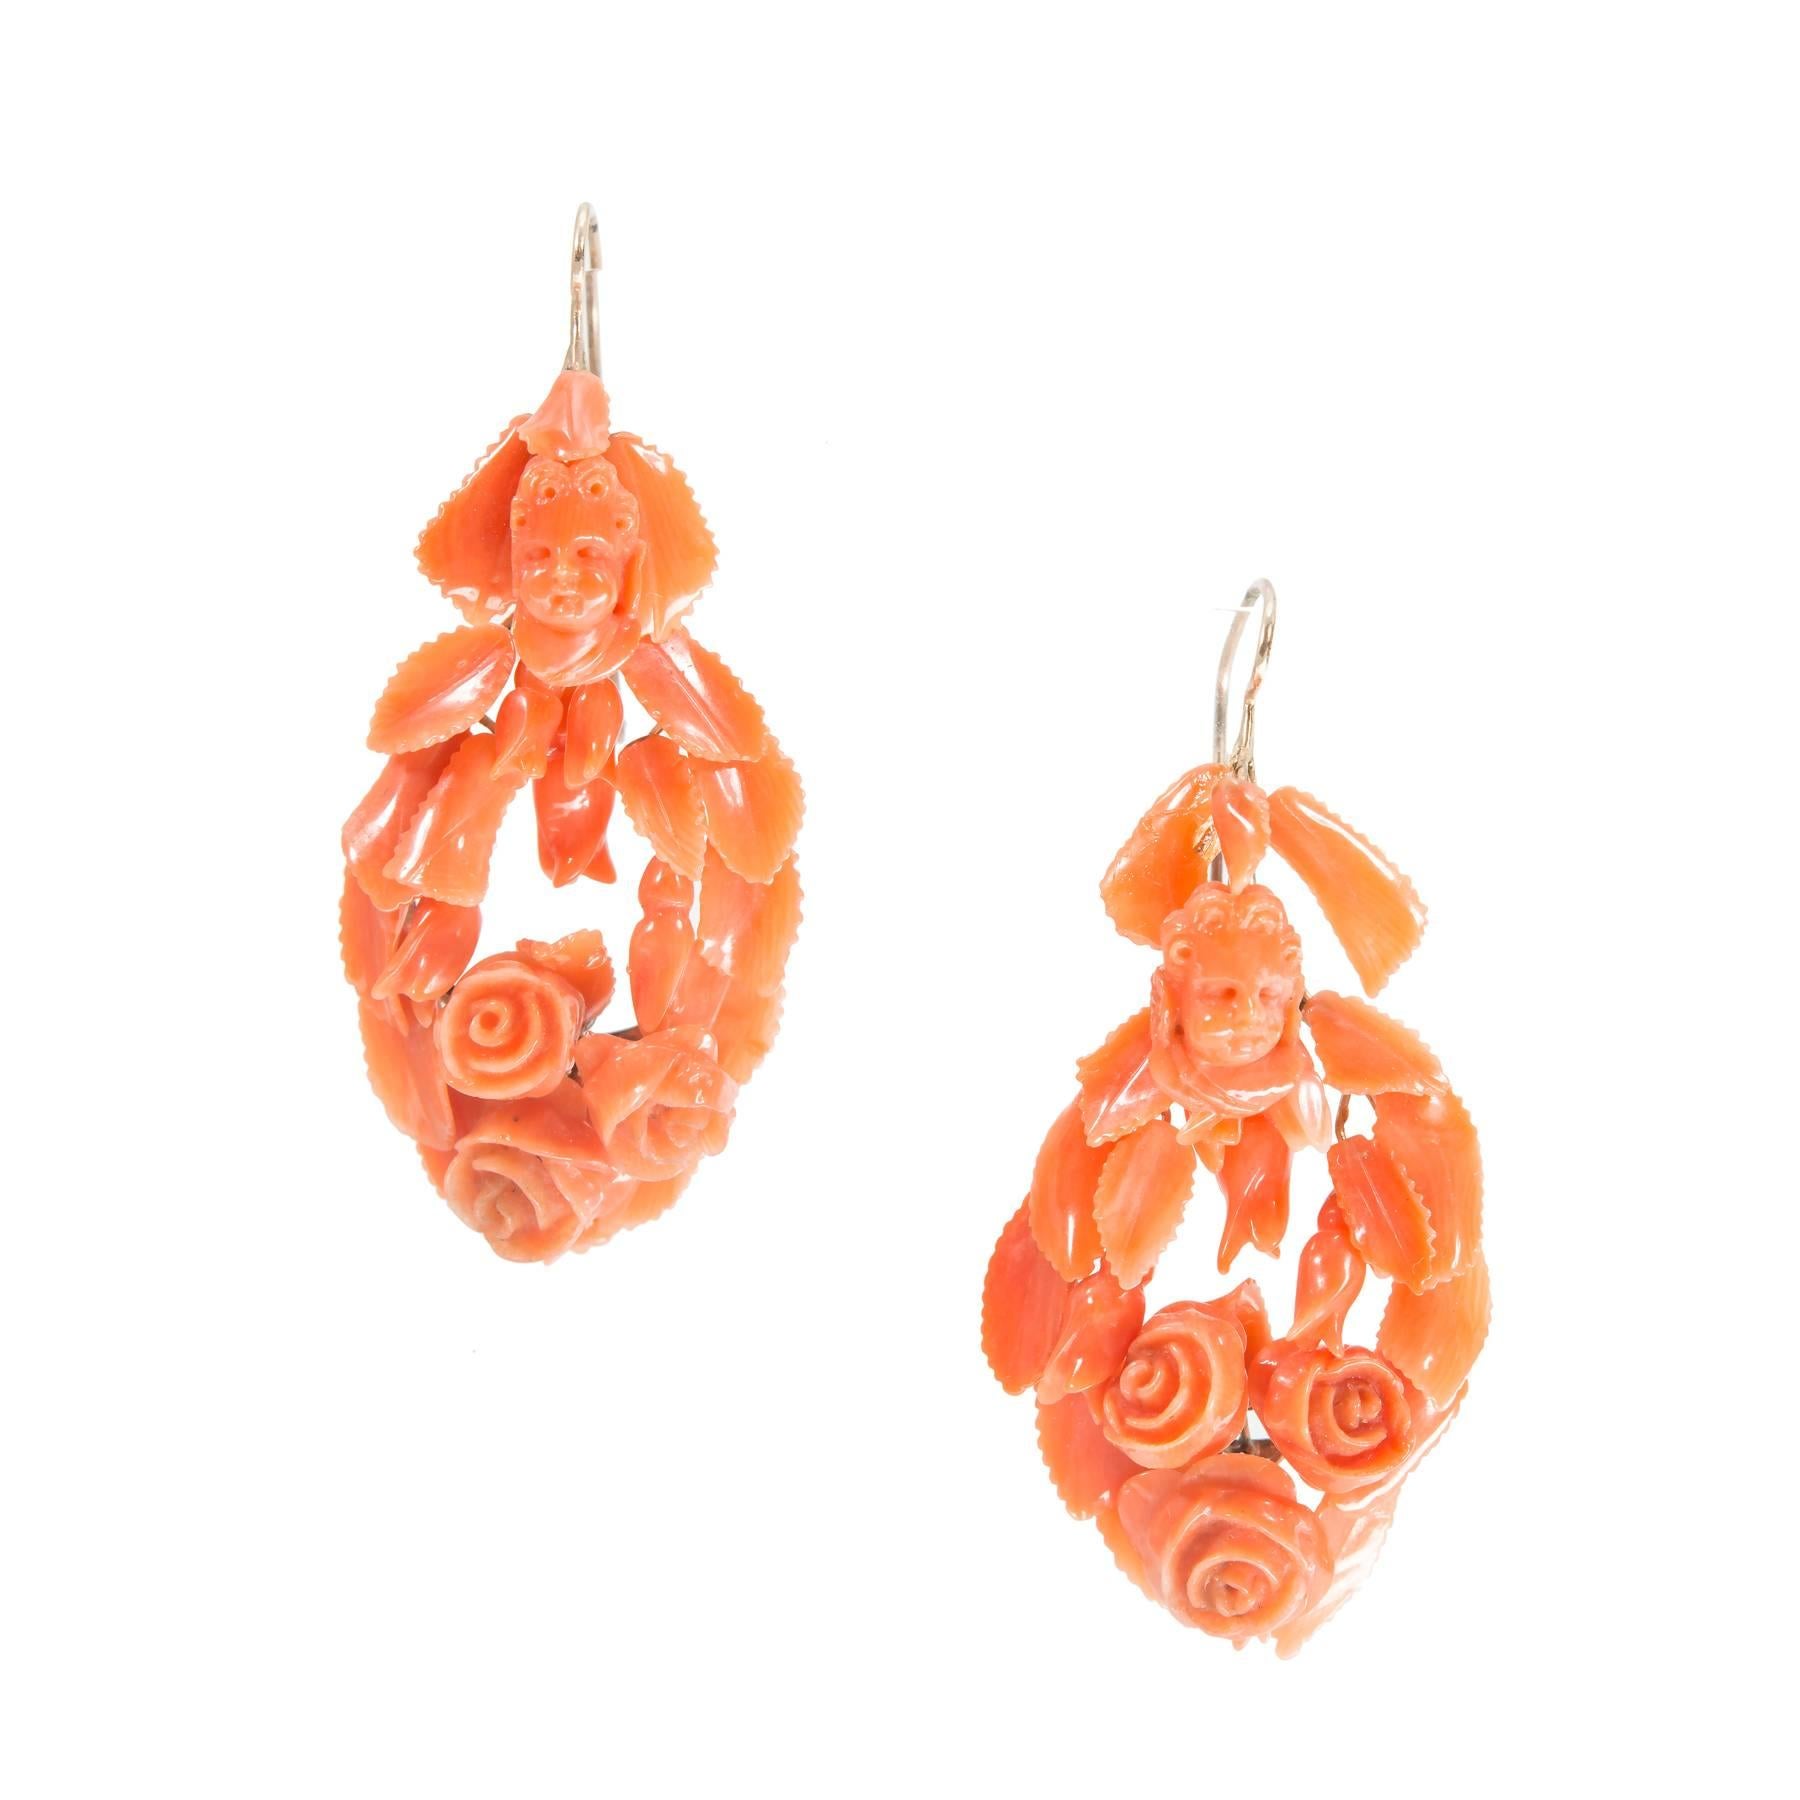 Victorian natural  carved Coral dangle earrings. All natural Coral. Circa 1800's.

48 pieces of natural carved Coral, 2 Angel’s faces, flowers and leaves
Tested: 14k gold
9.7 grams
Depth: 11.52mm
Top to bottom: 49.97mm or 1.96 inches
Width: